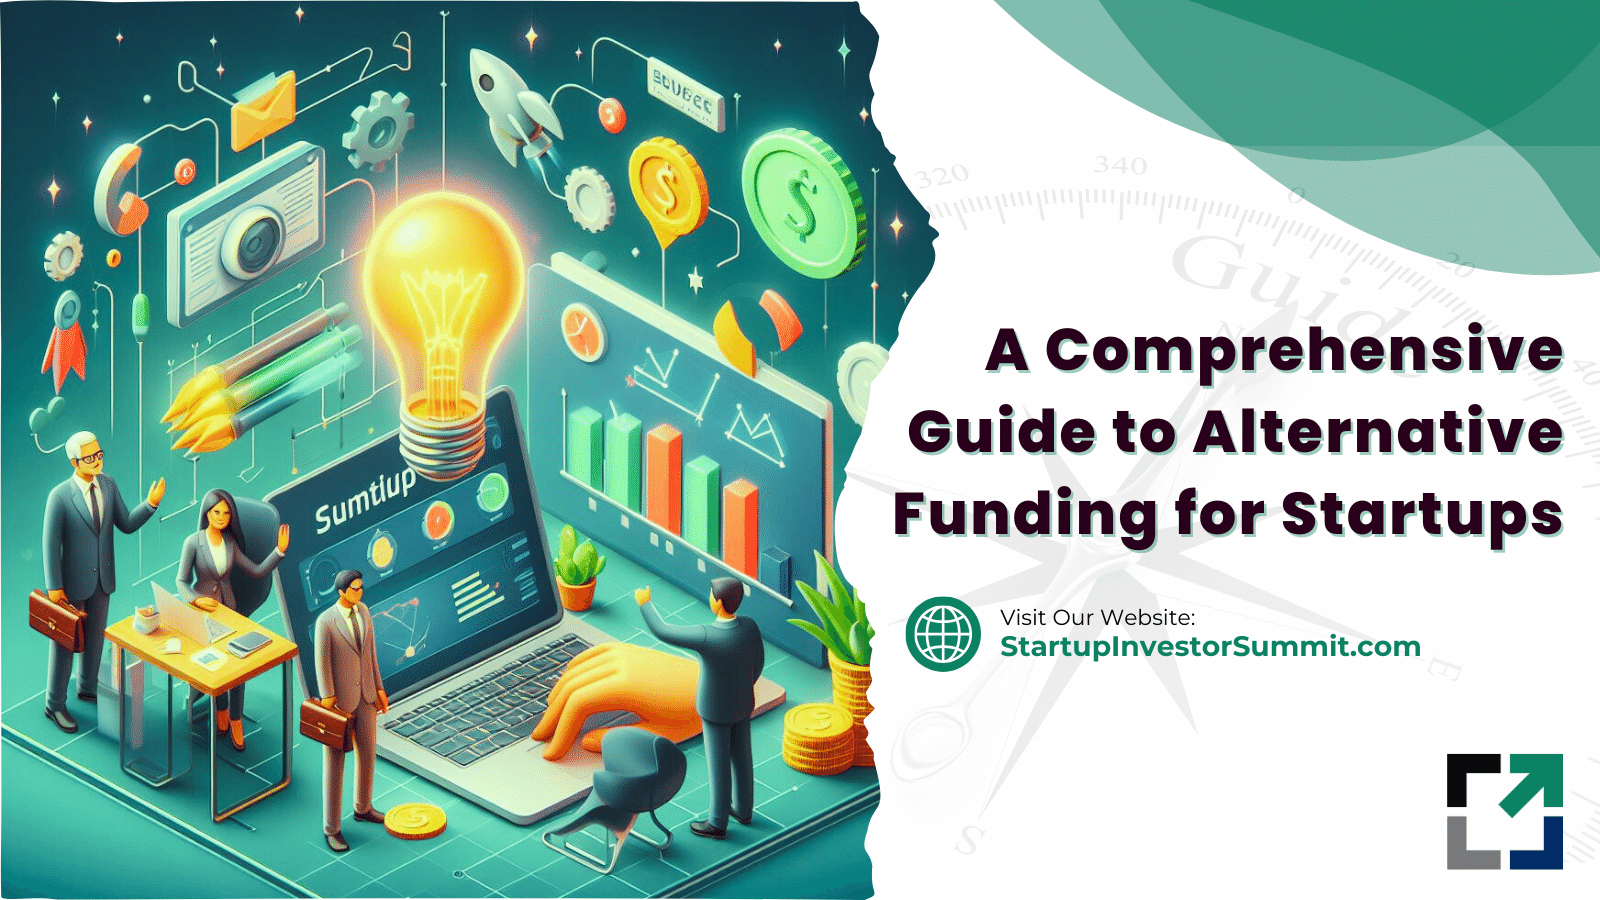 A Comprehensive Guide to Alternative Funding for Startups